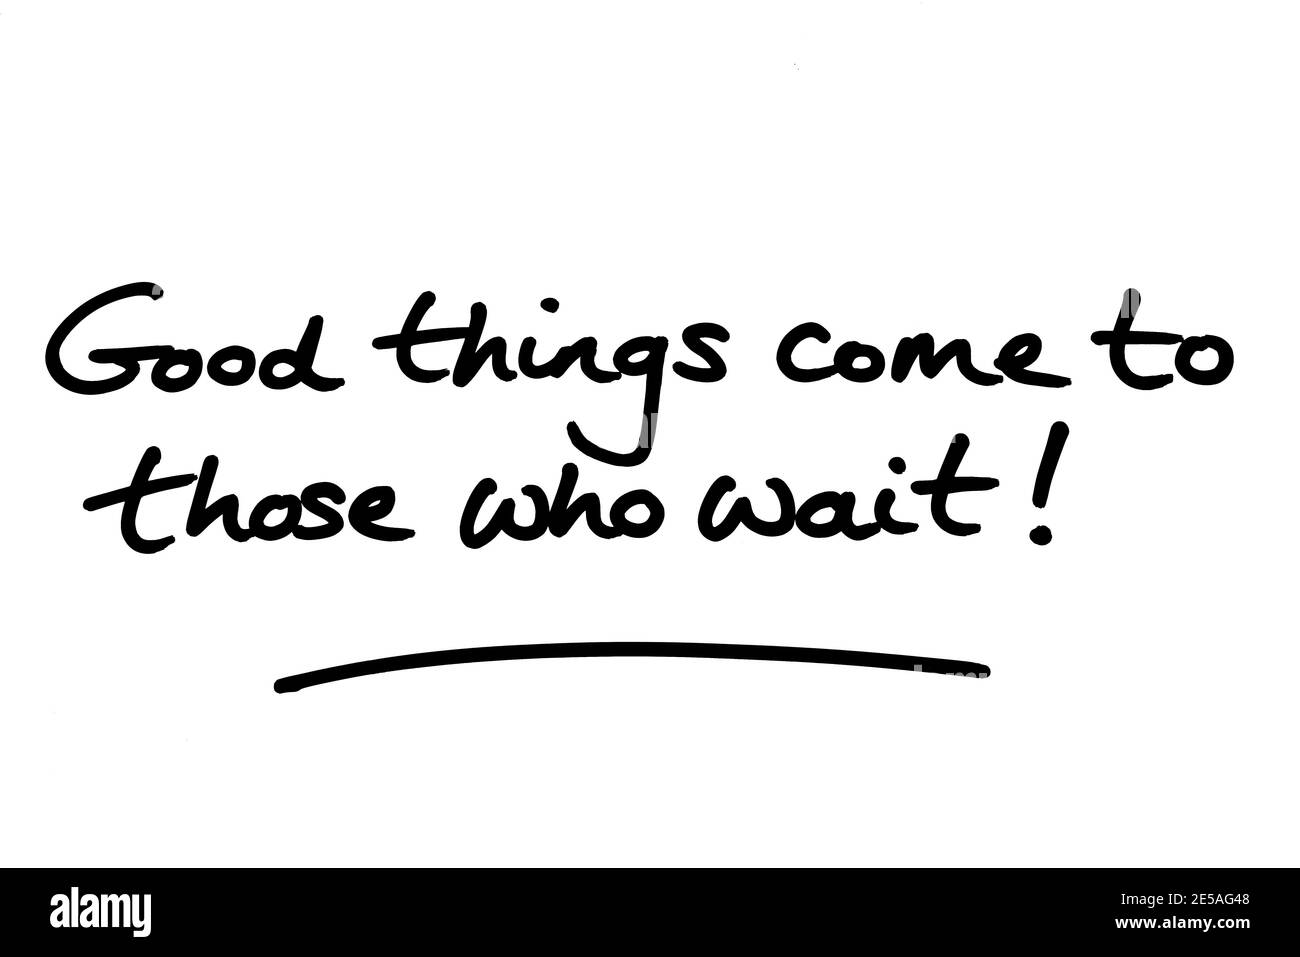 Good things come to those who wait! handwritten on a white background. Stock Photo